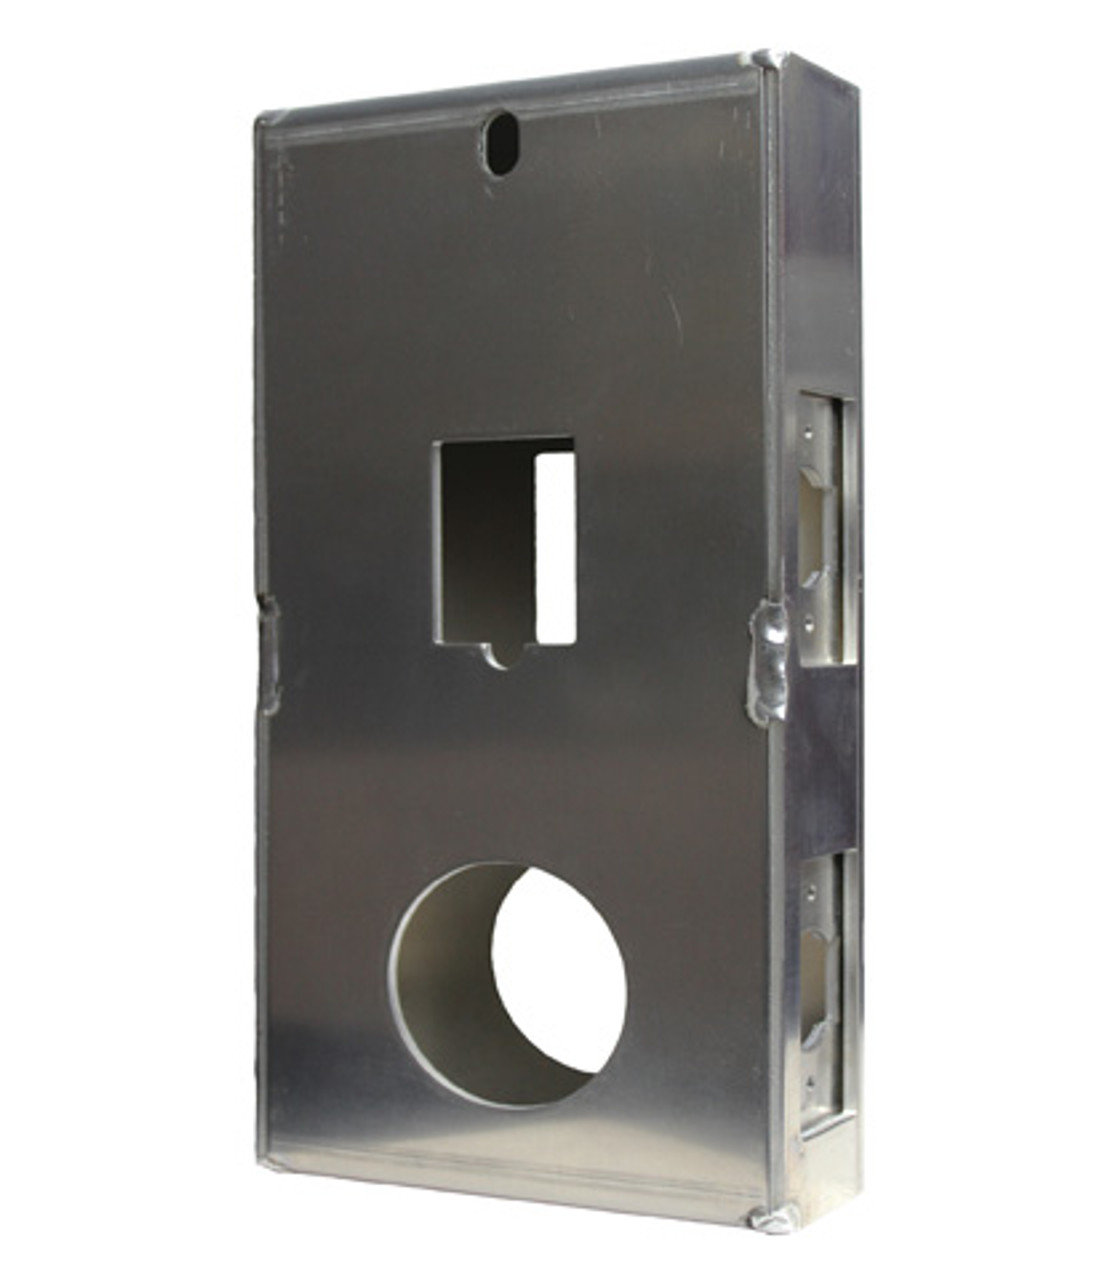 Lockey GB210 Gate Box Compatible with M210 + Handle